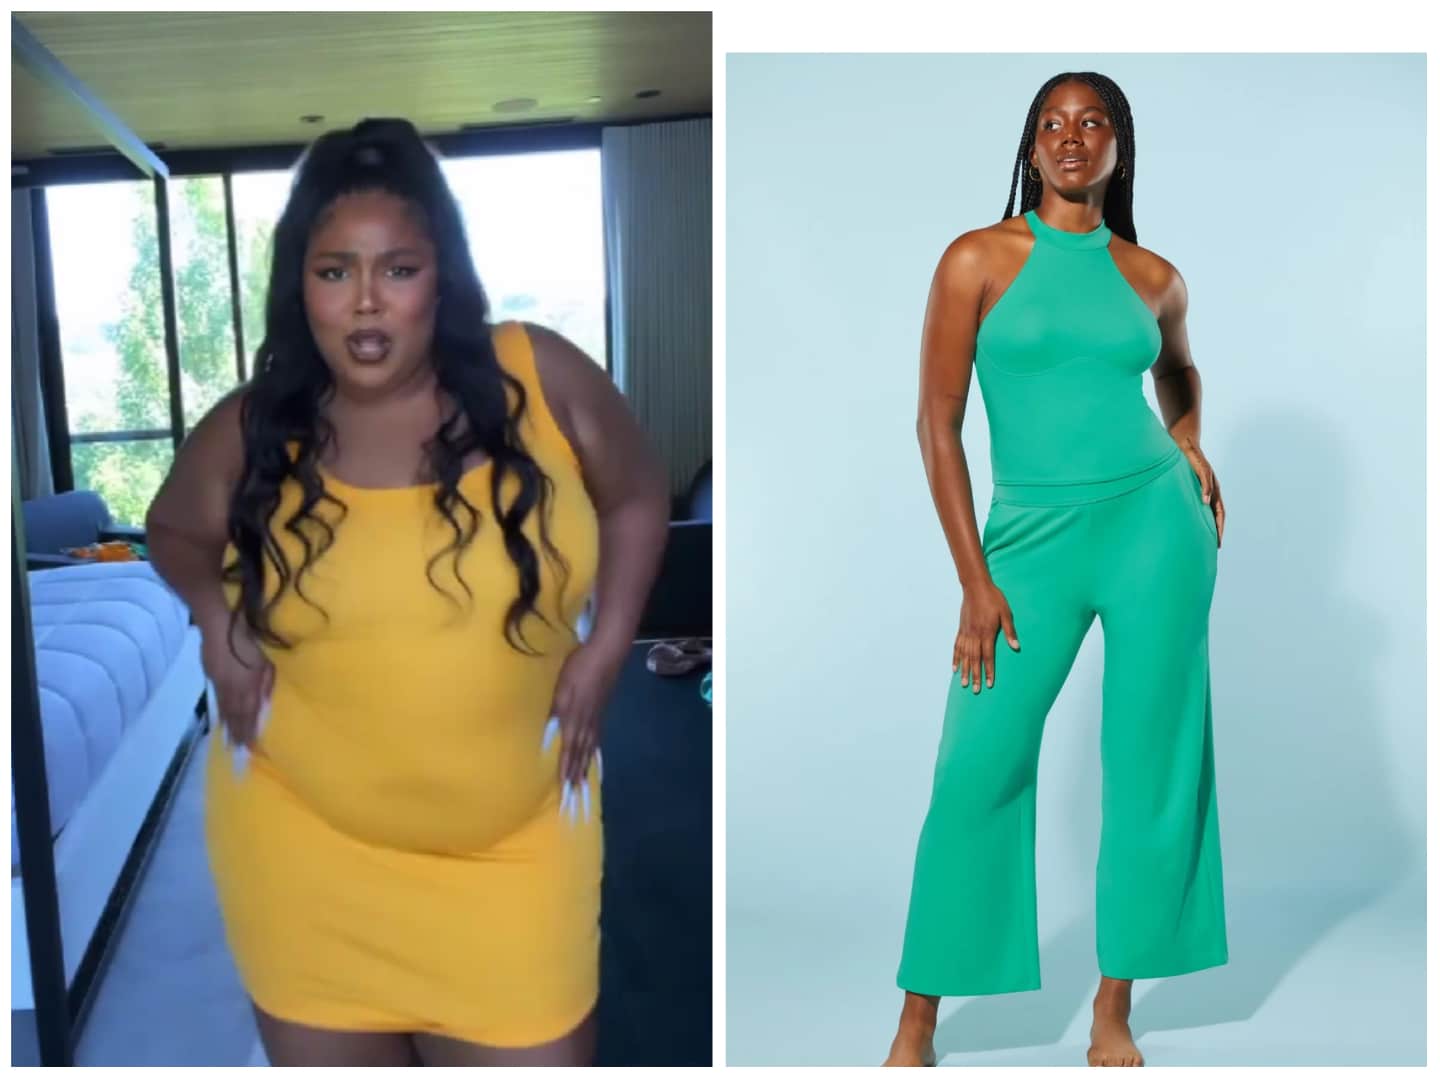 Lizzo stuns fans with physique as she says she's 'putting herself first